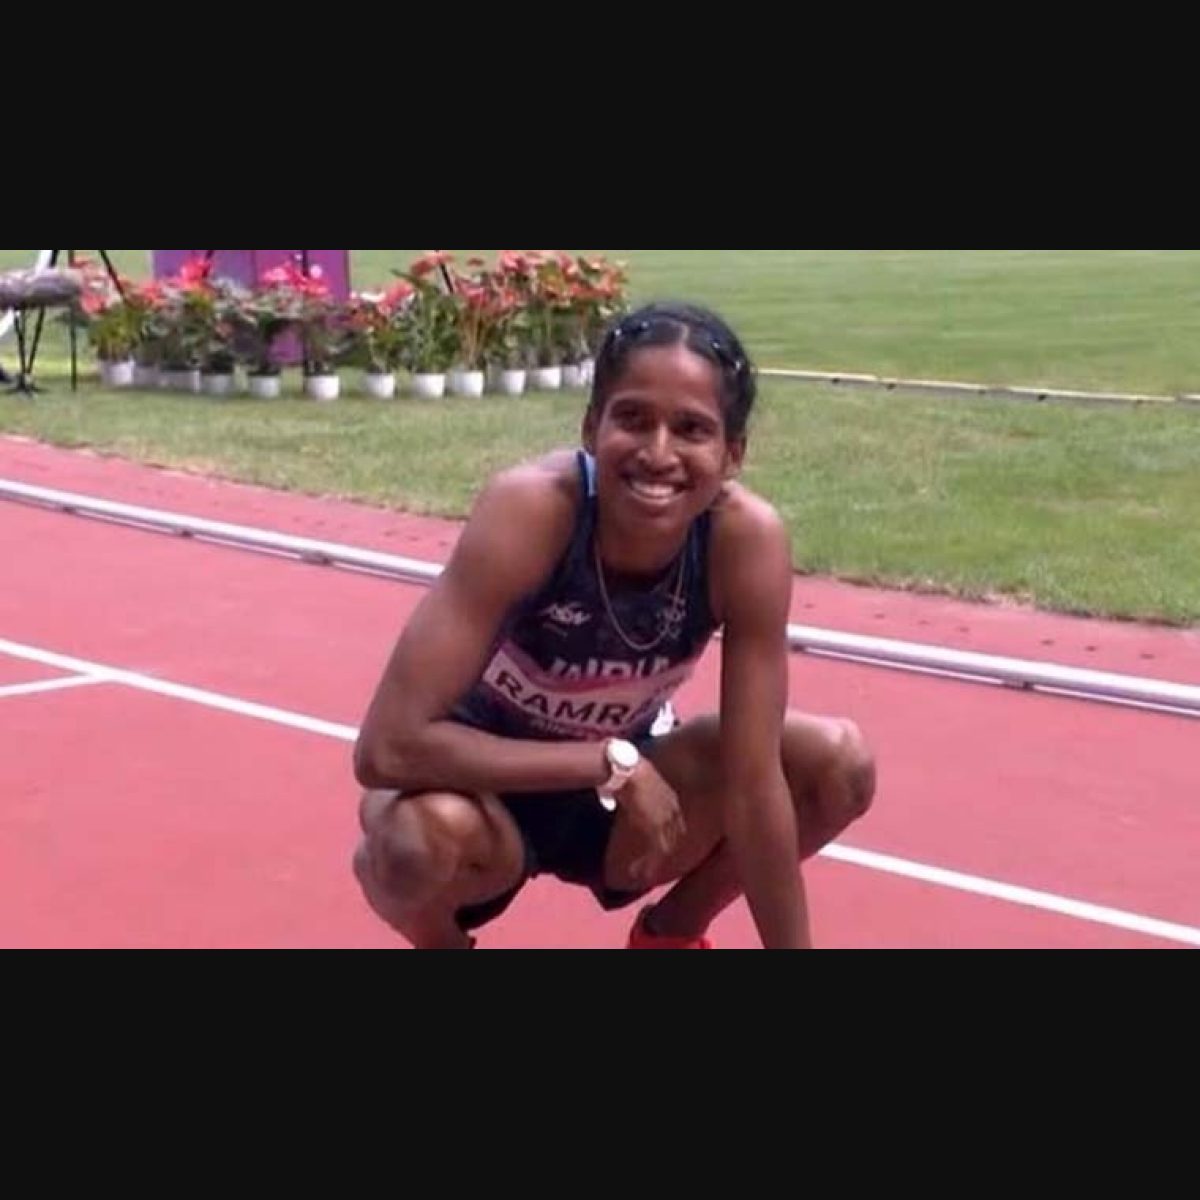 Vithya equals PT Usha's national record in women's 400m hurdle